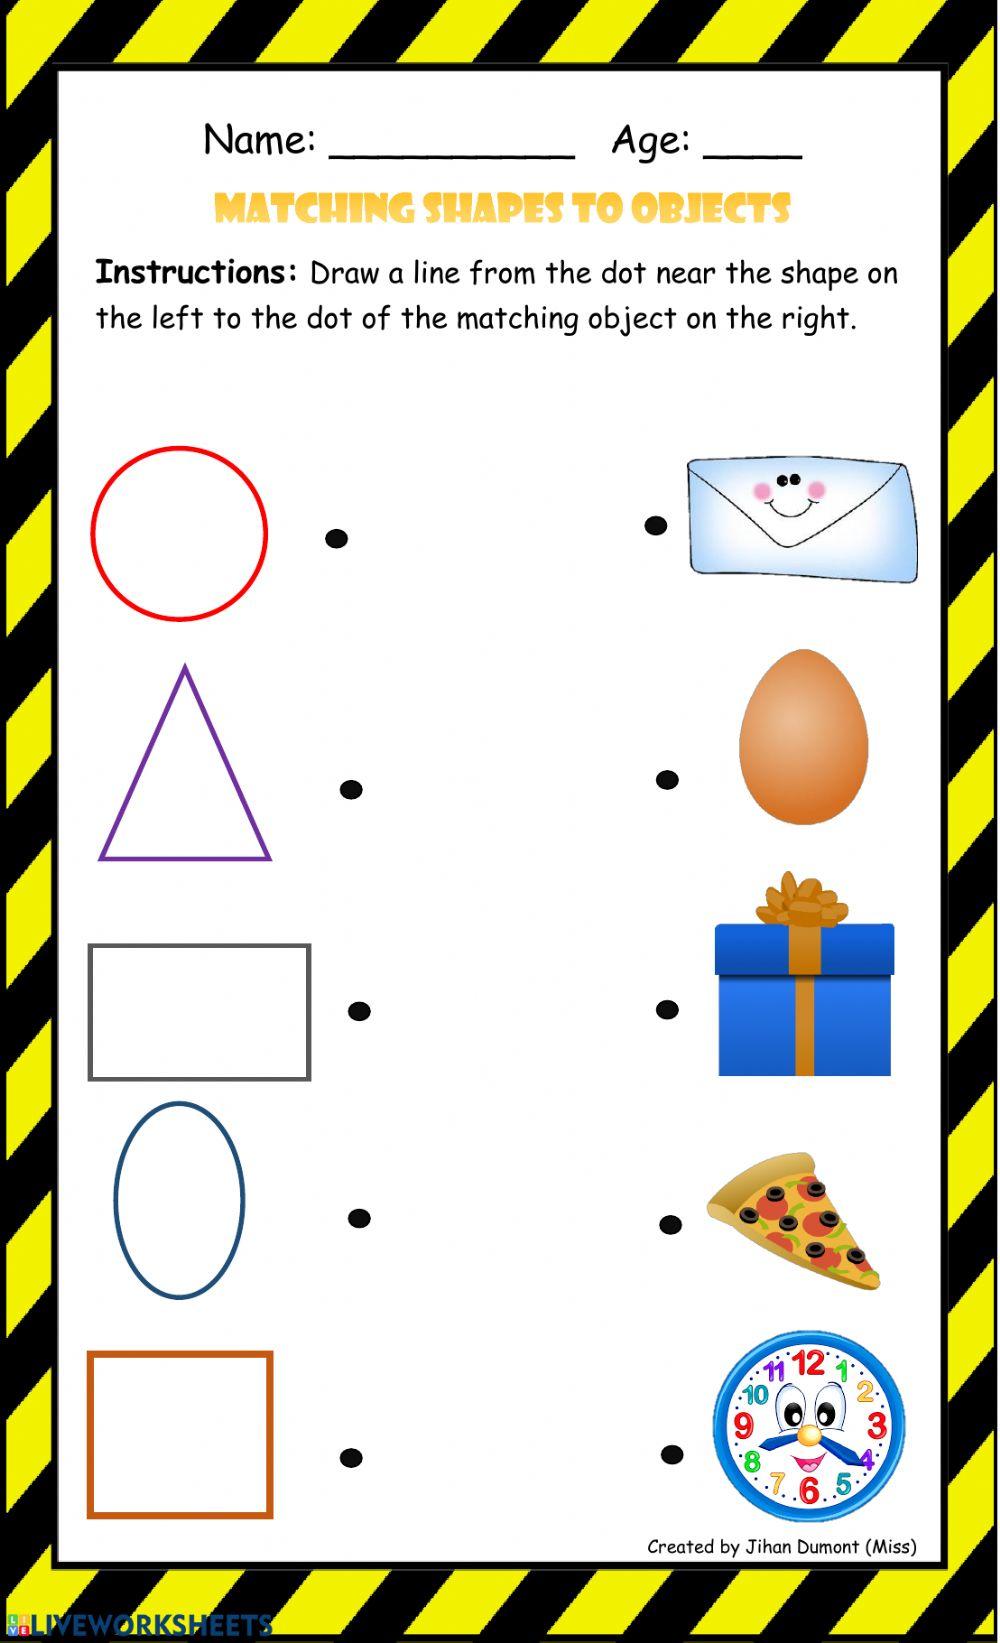 Matching Shapes to Objects